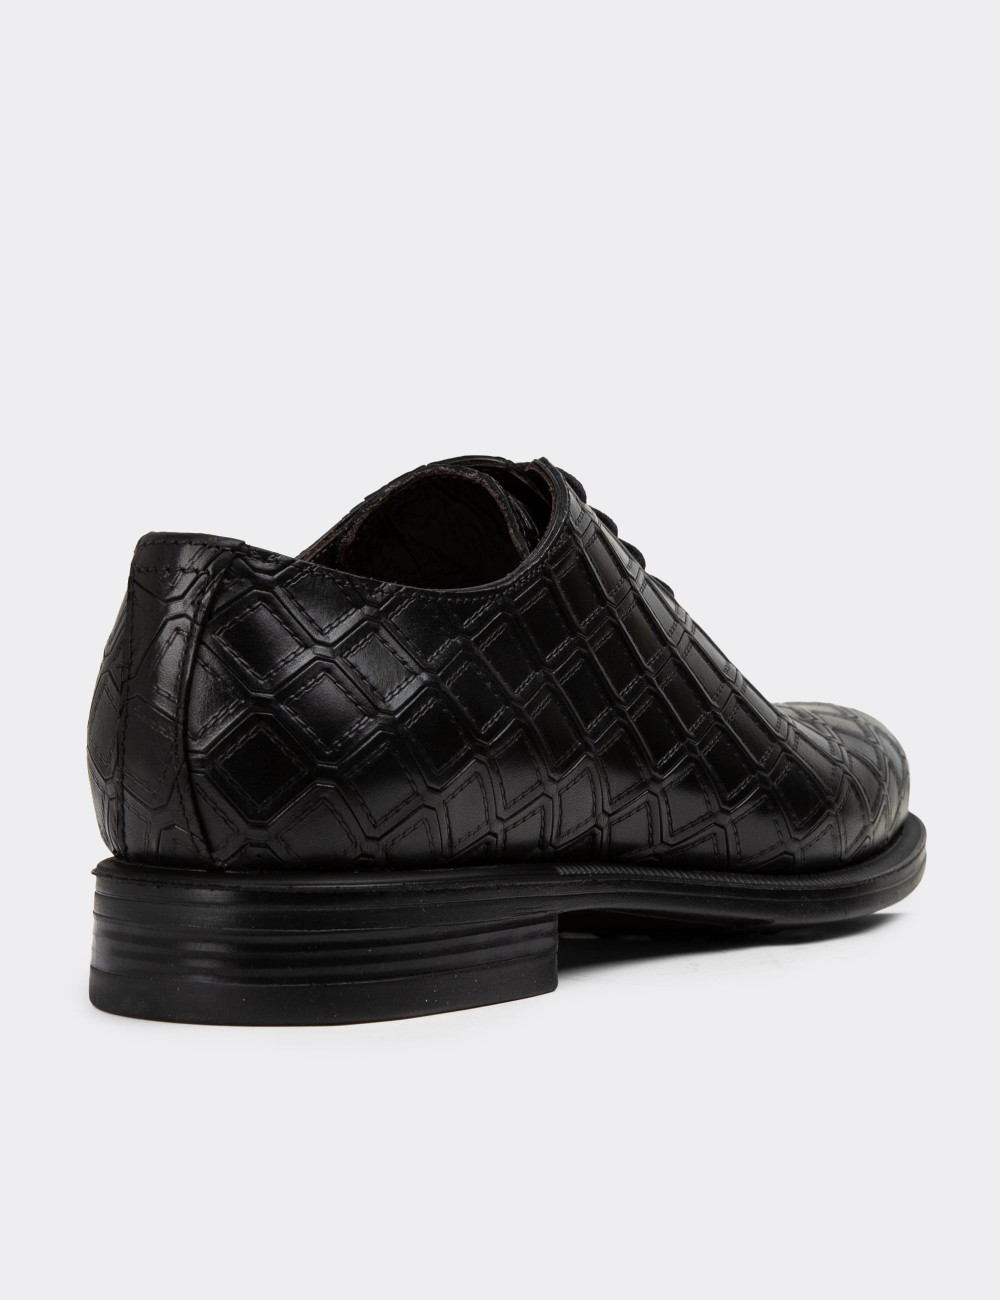 Black Leather Classic Shoes - 01830MSYHC03